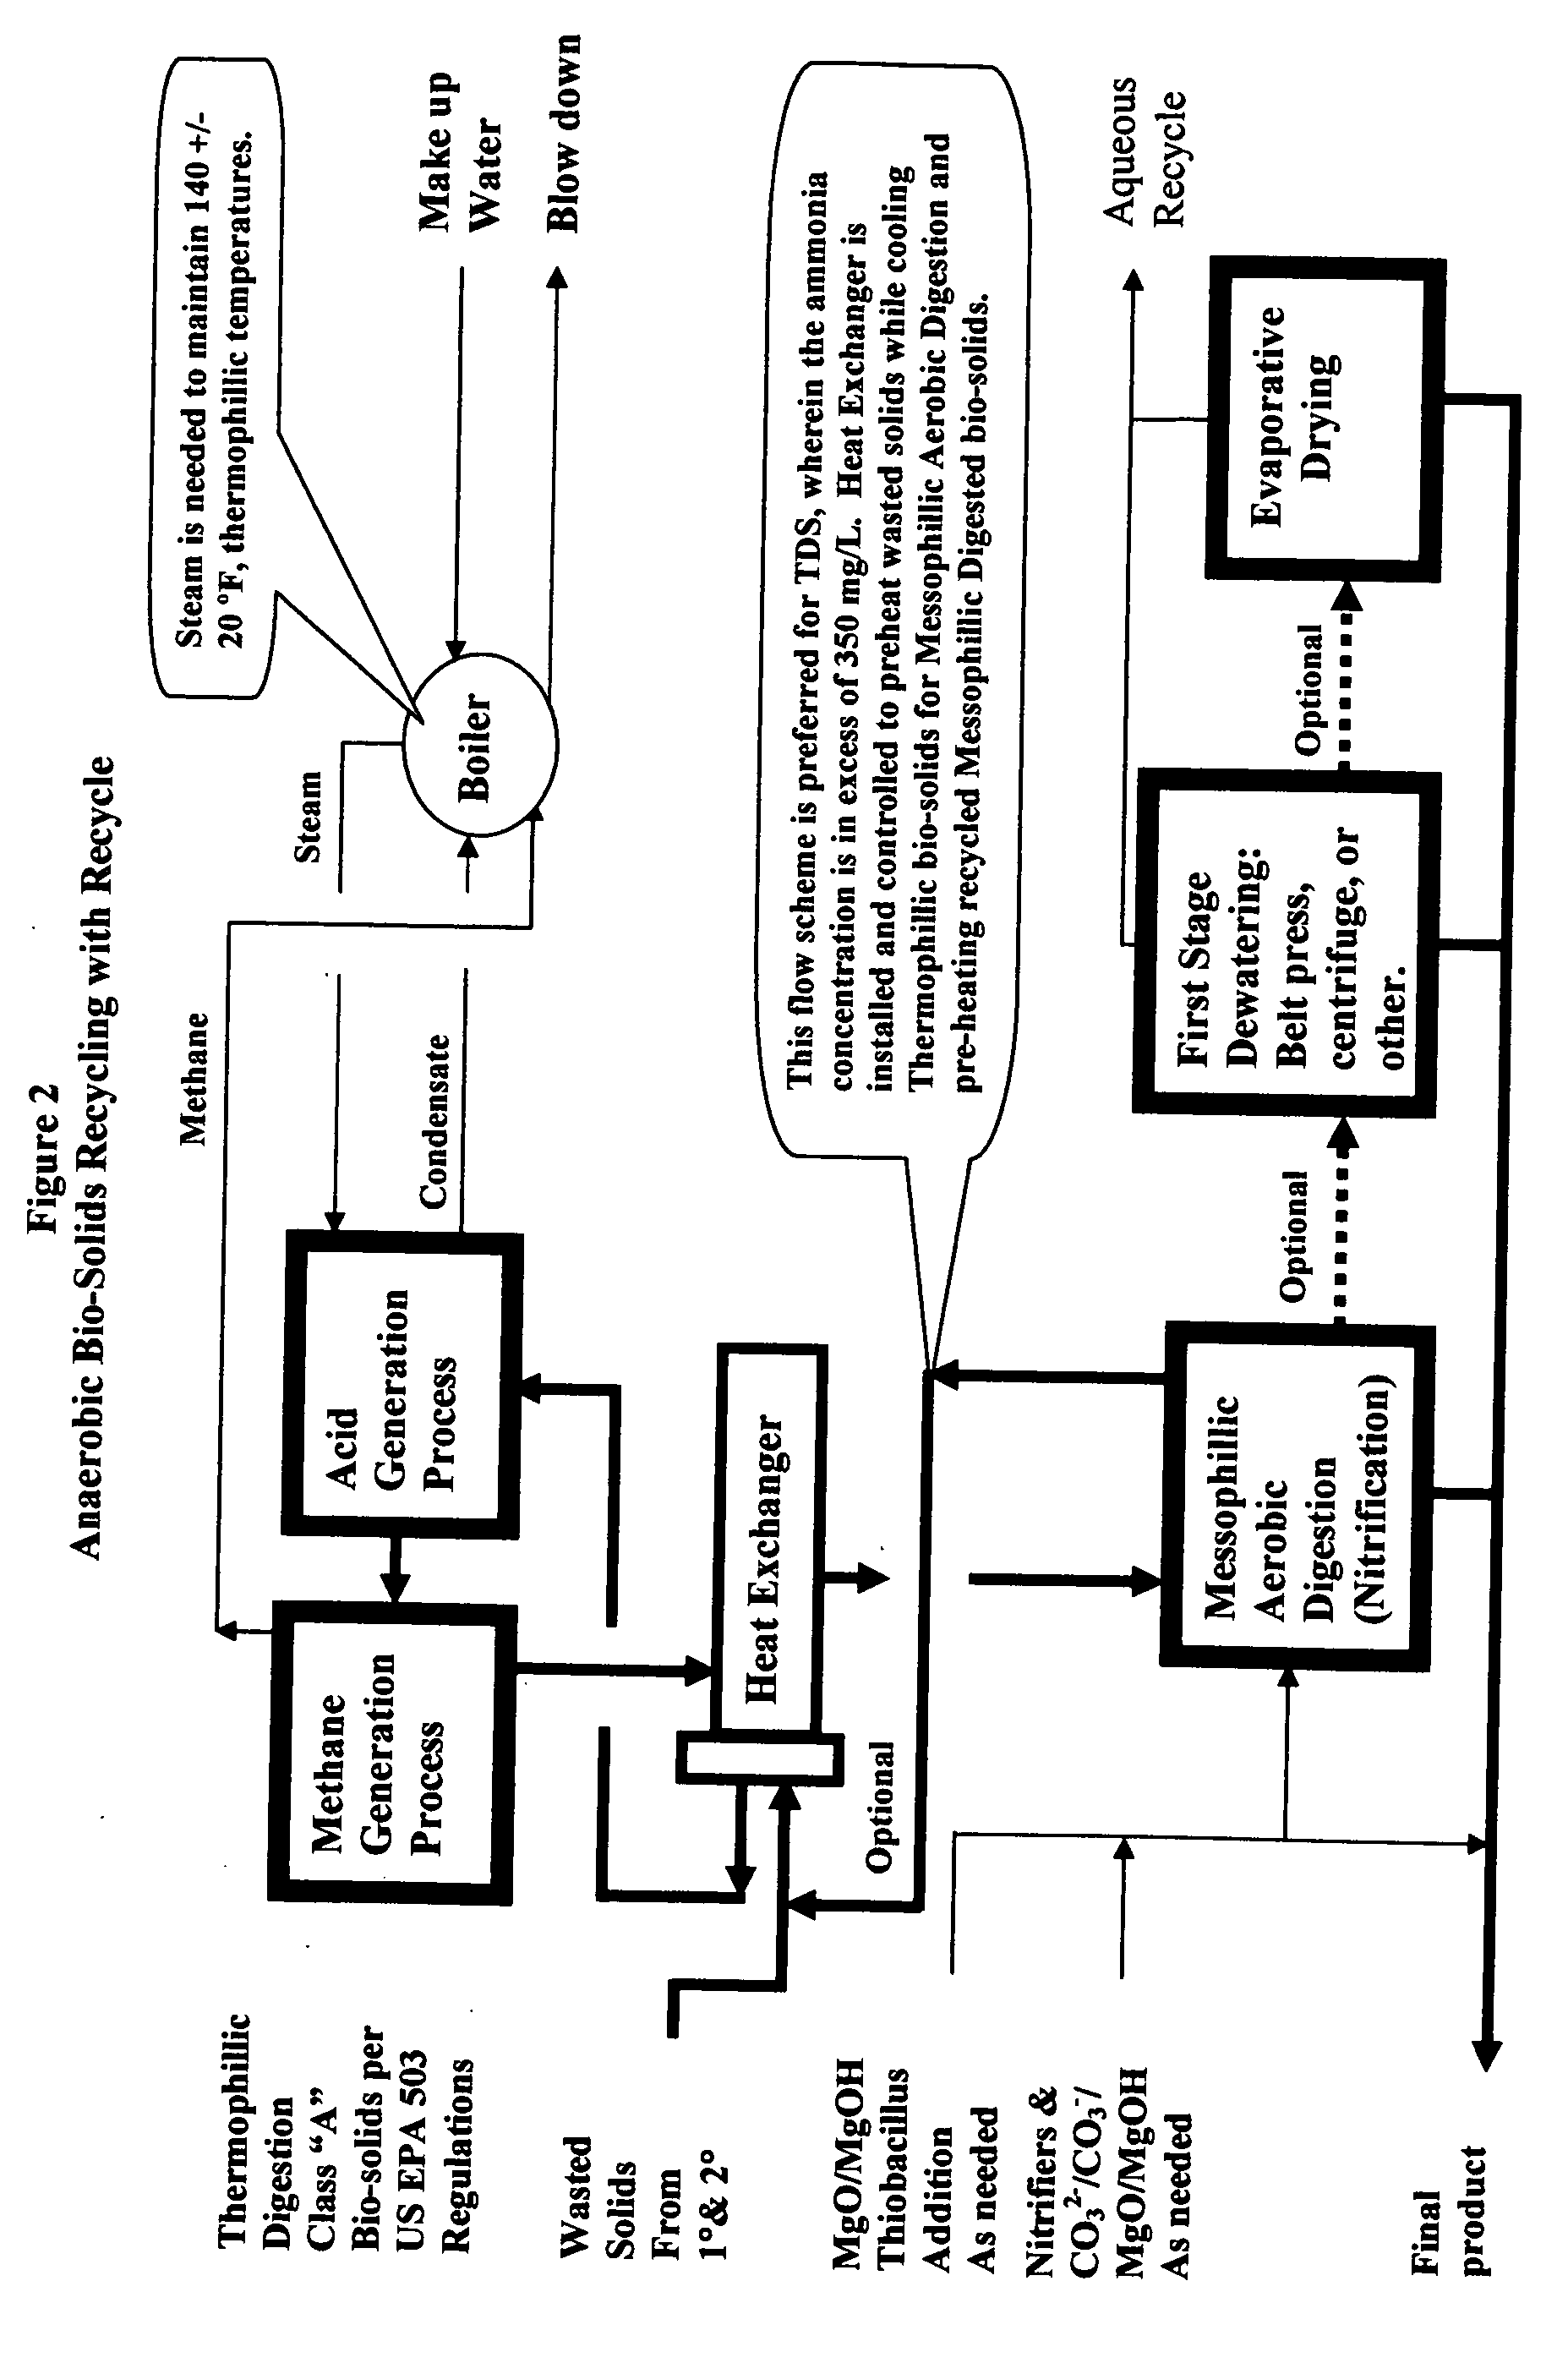 Methods, processes and apparatus for bio-solids recycling and the product of bio-solids from such methods, processes and apparatus